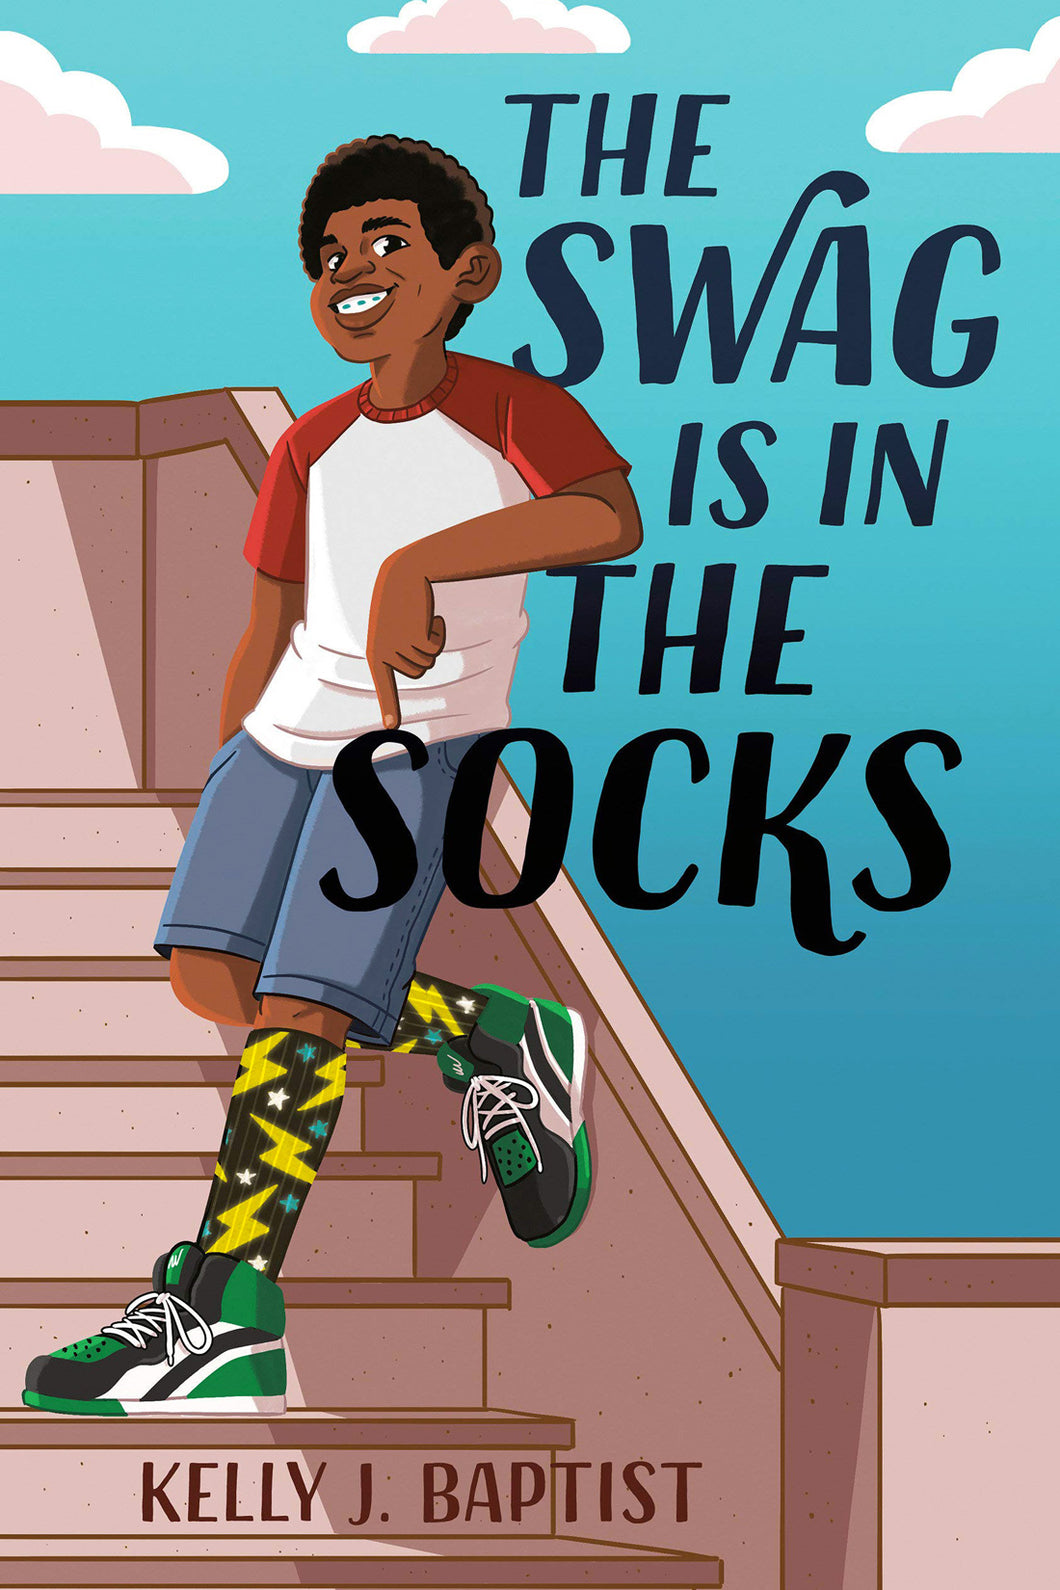 The Swag Is in the Socks by Kelly J Baptist / Hardcover or Paperback - NEW BOOK